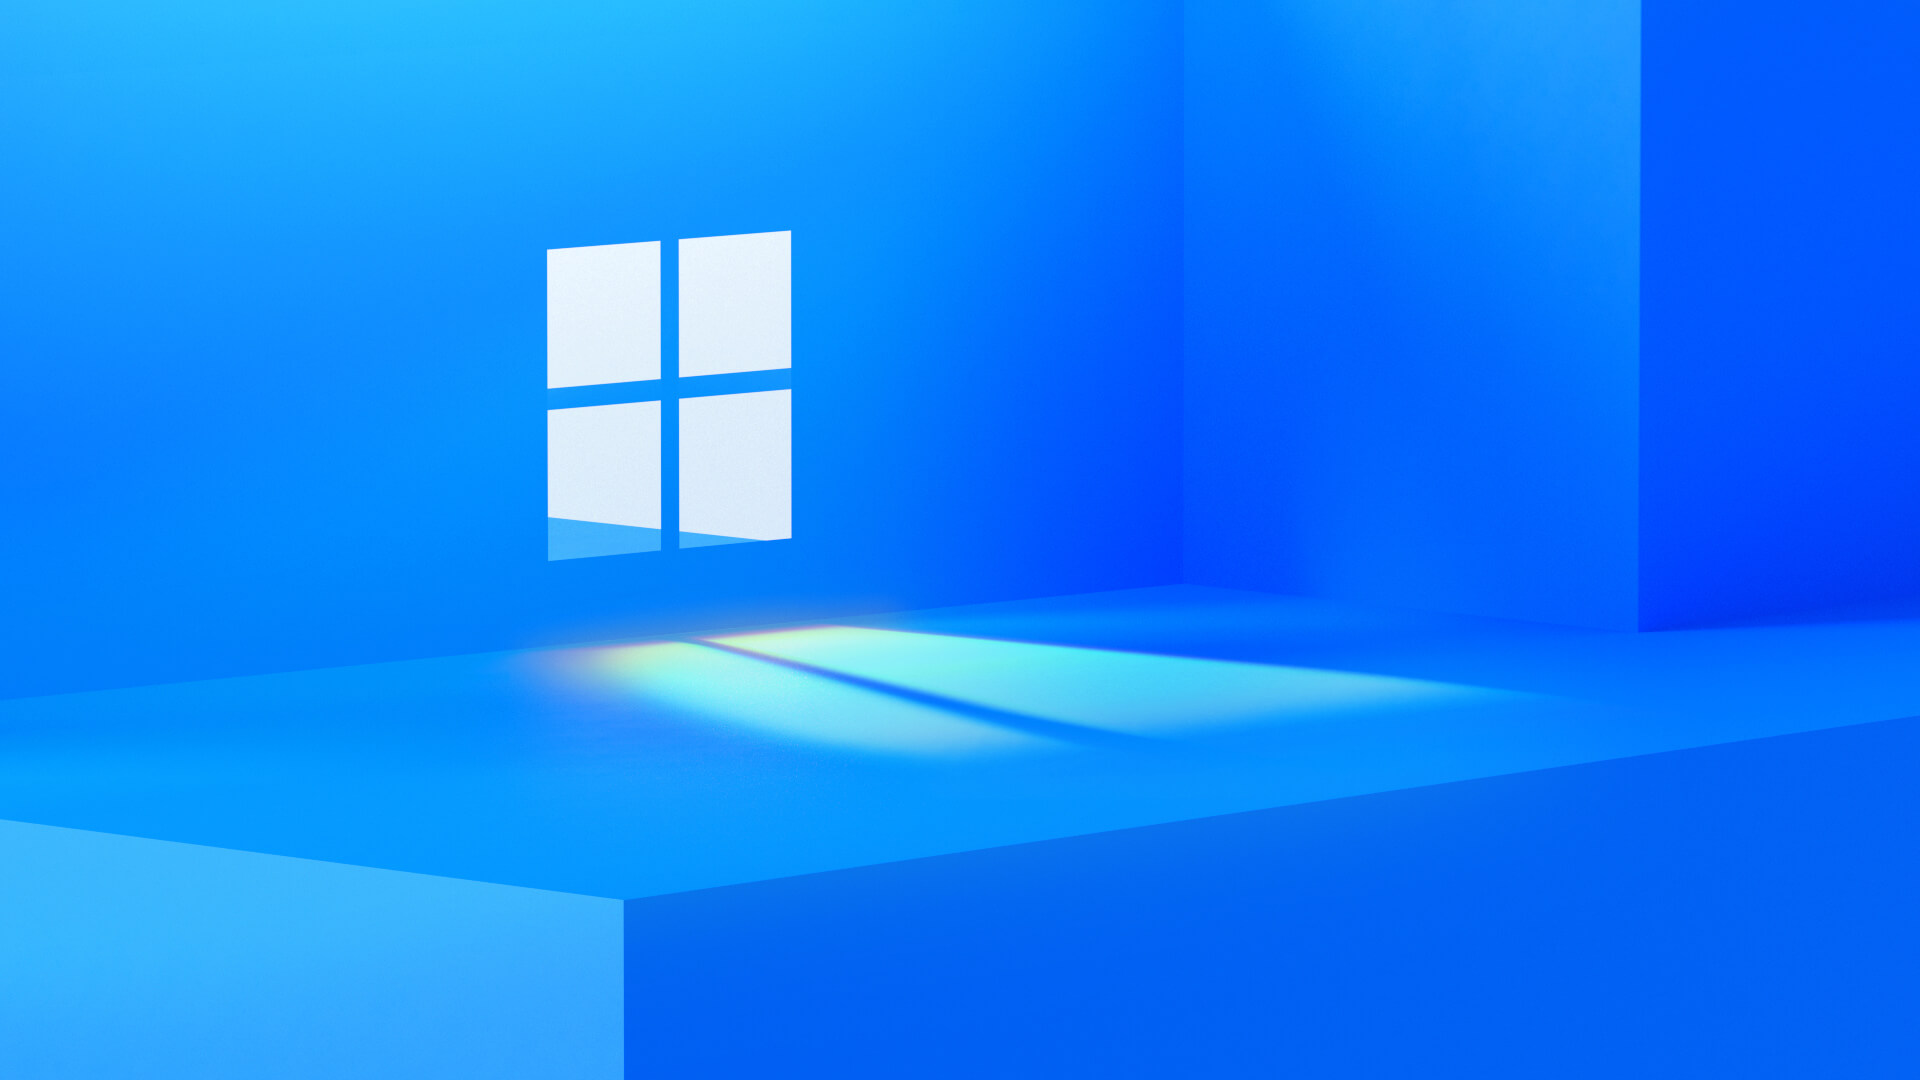 What's next for Windows